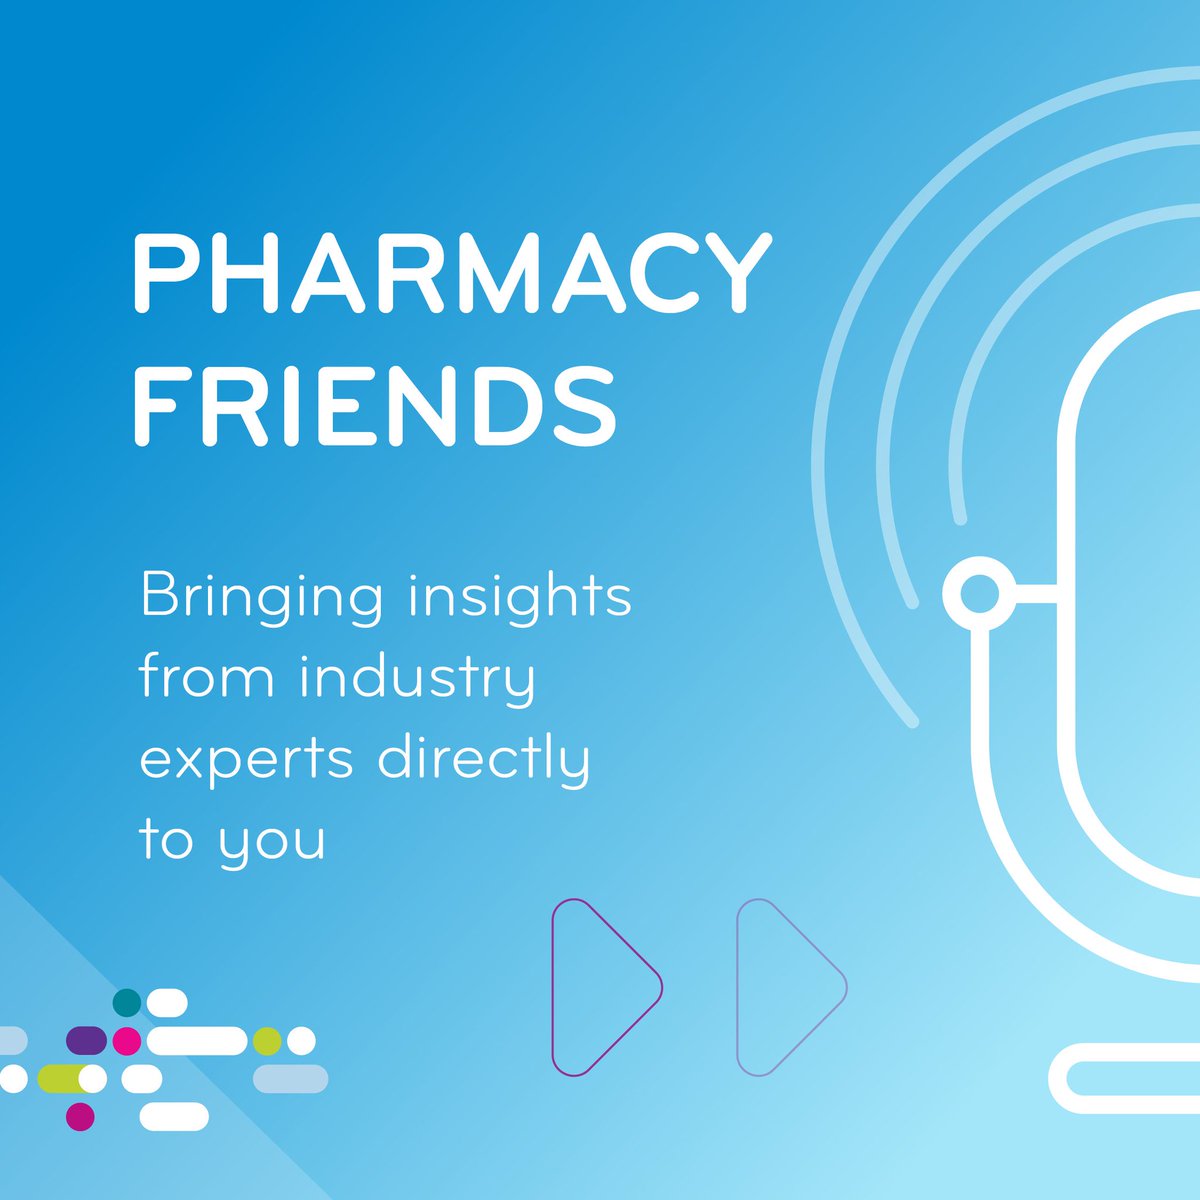 Pharmacy Friends is our podcast dedicated to bringing industry experts to the same table to talk about what is happening in pharmacy today, what is coming in the future and most importantly, what it means to you. Listen to past episodes here: bit.ly/3t7nriJ